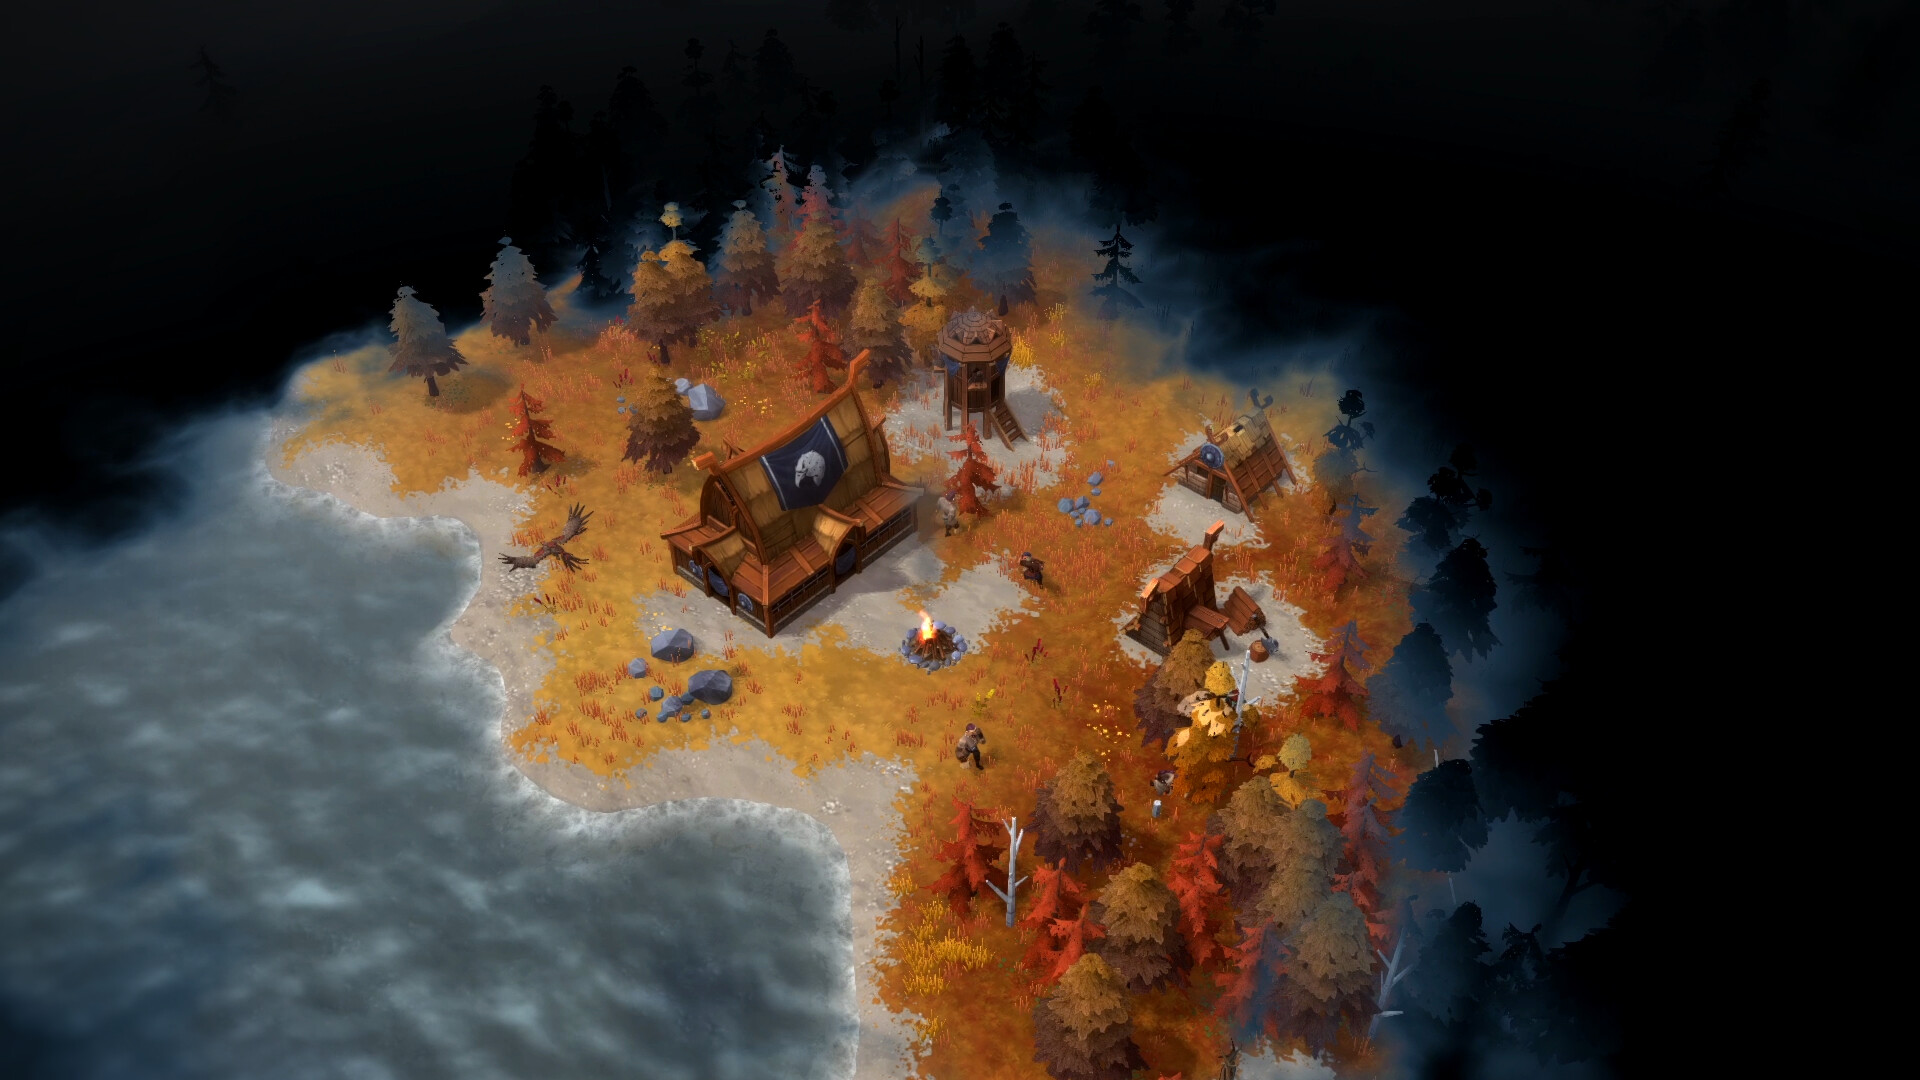 Northgard - Hræsvelg, Clan of the Eagle Featured Screenshot #1